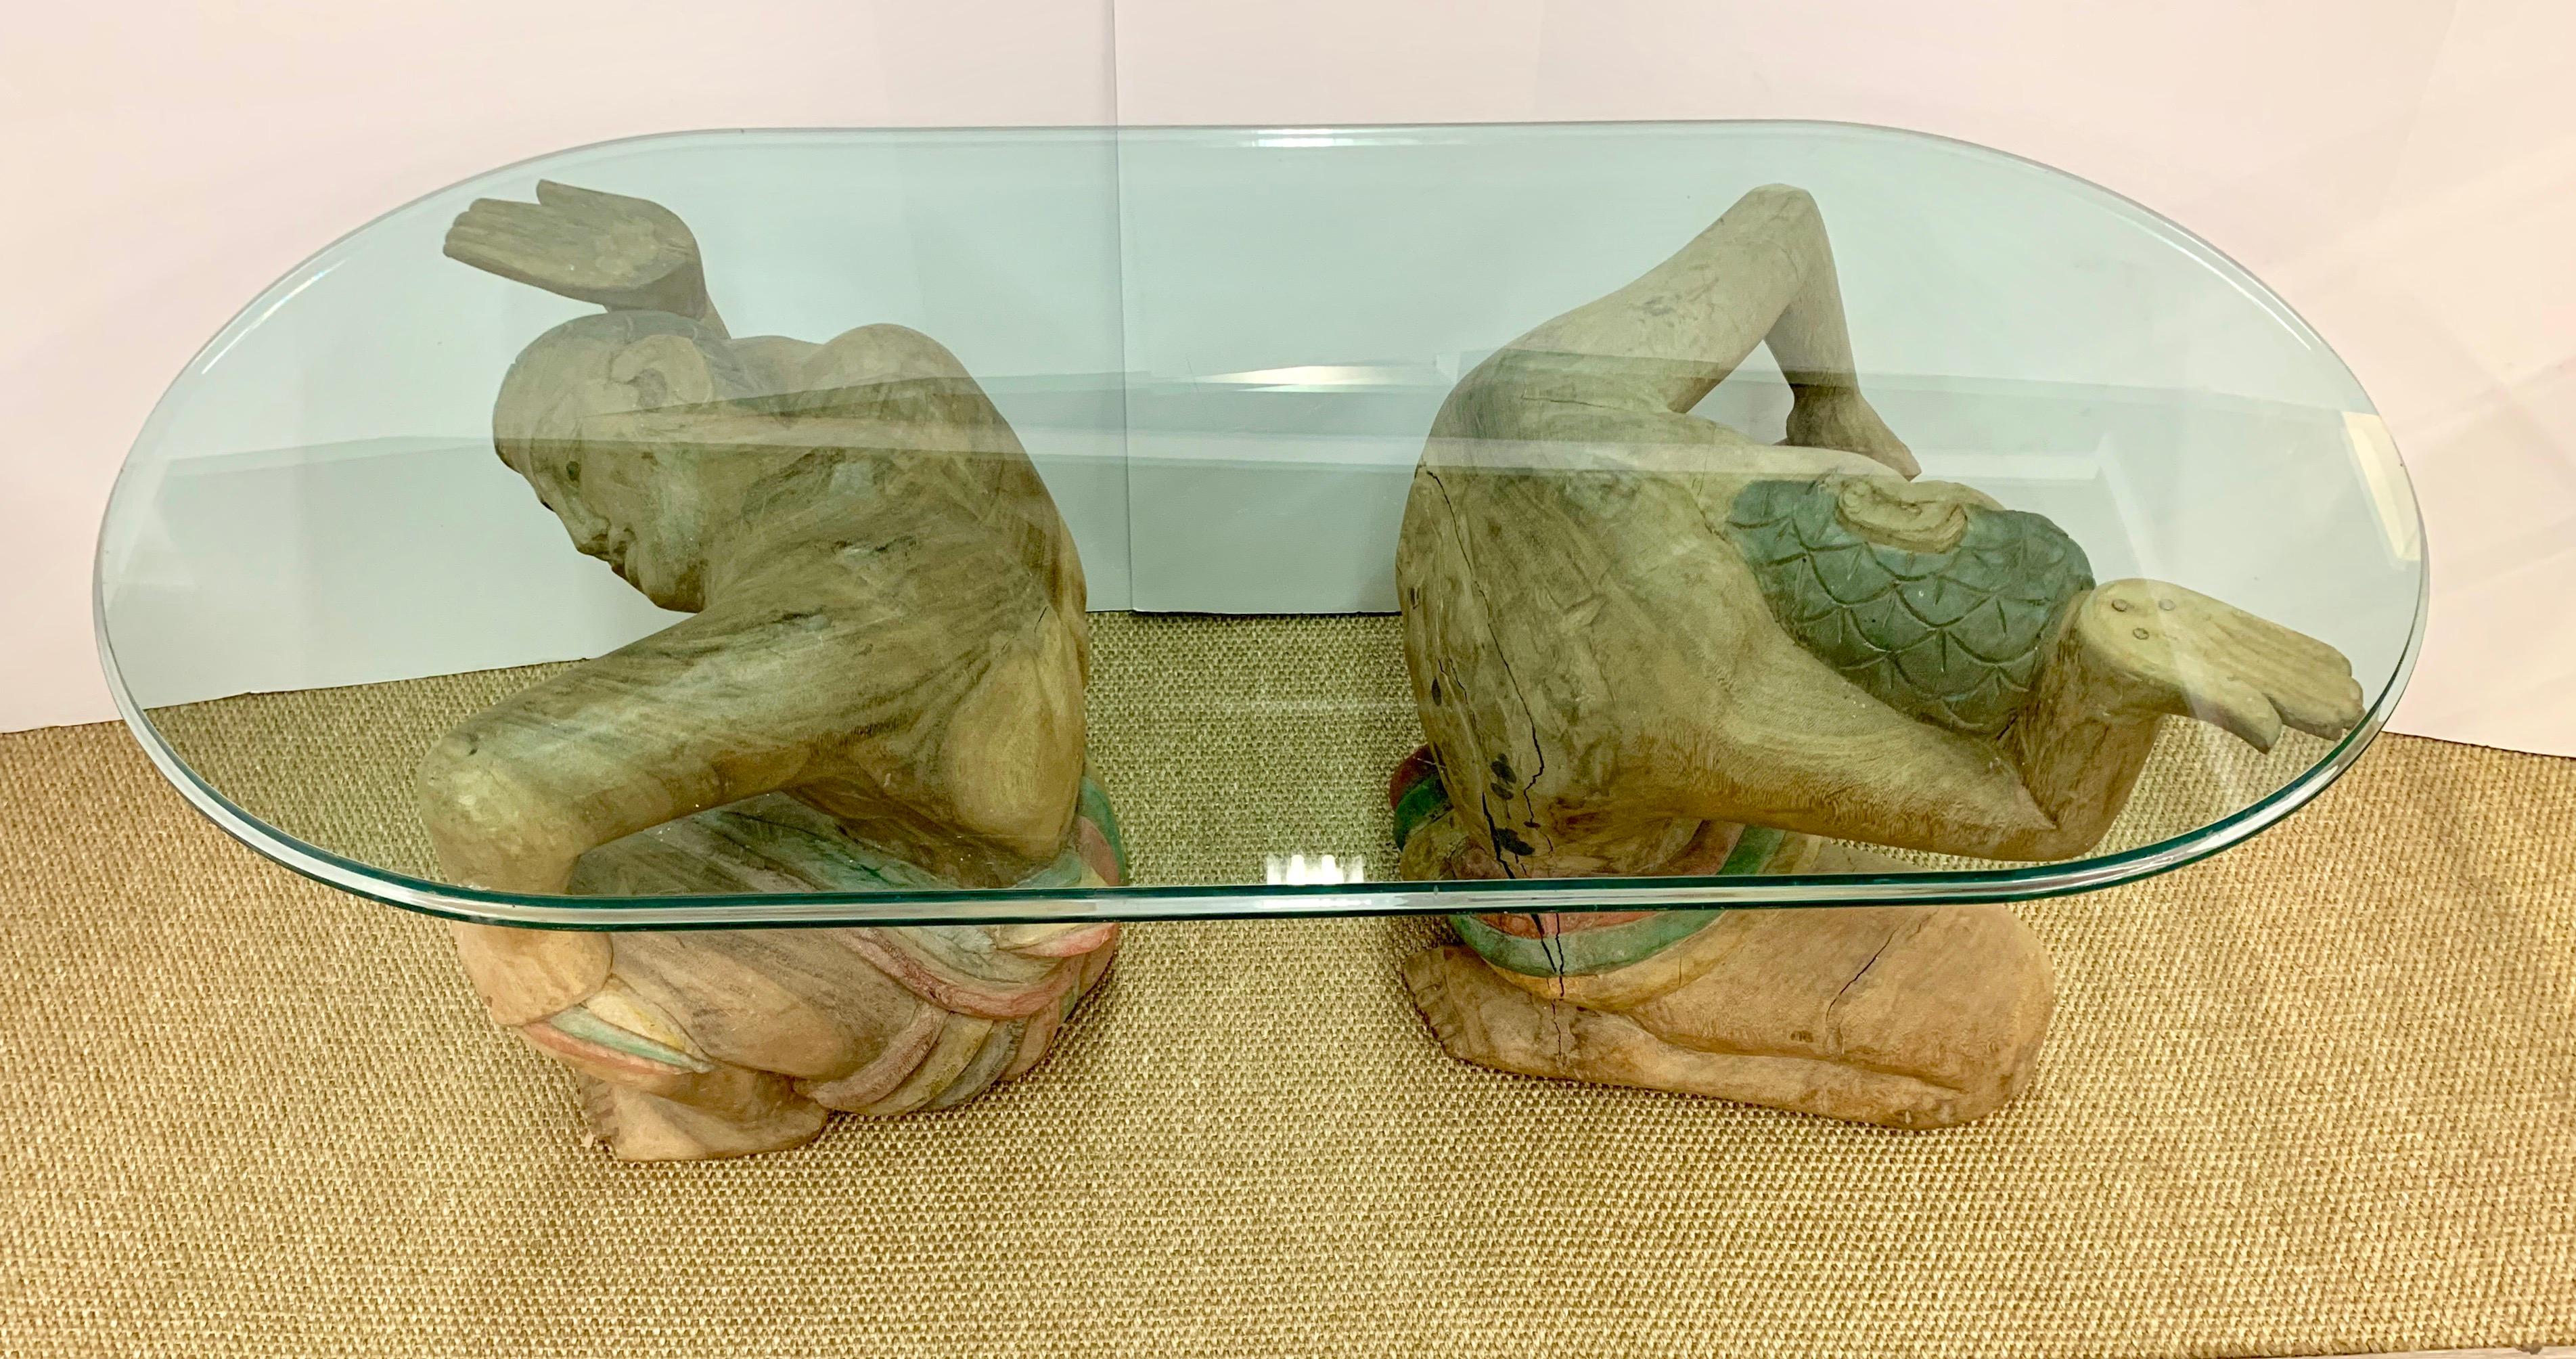 Oval glass top table with unusual figural men base, two men total, all carved in wood.
Most of these sought after tables have one kneeling man at base, this one has two.